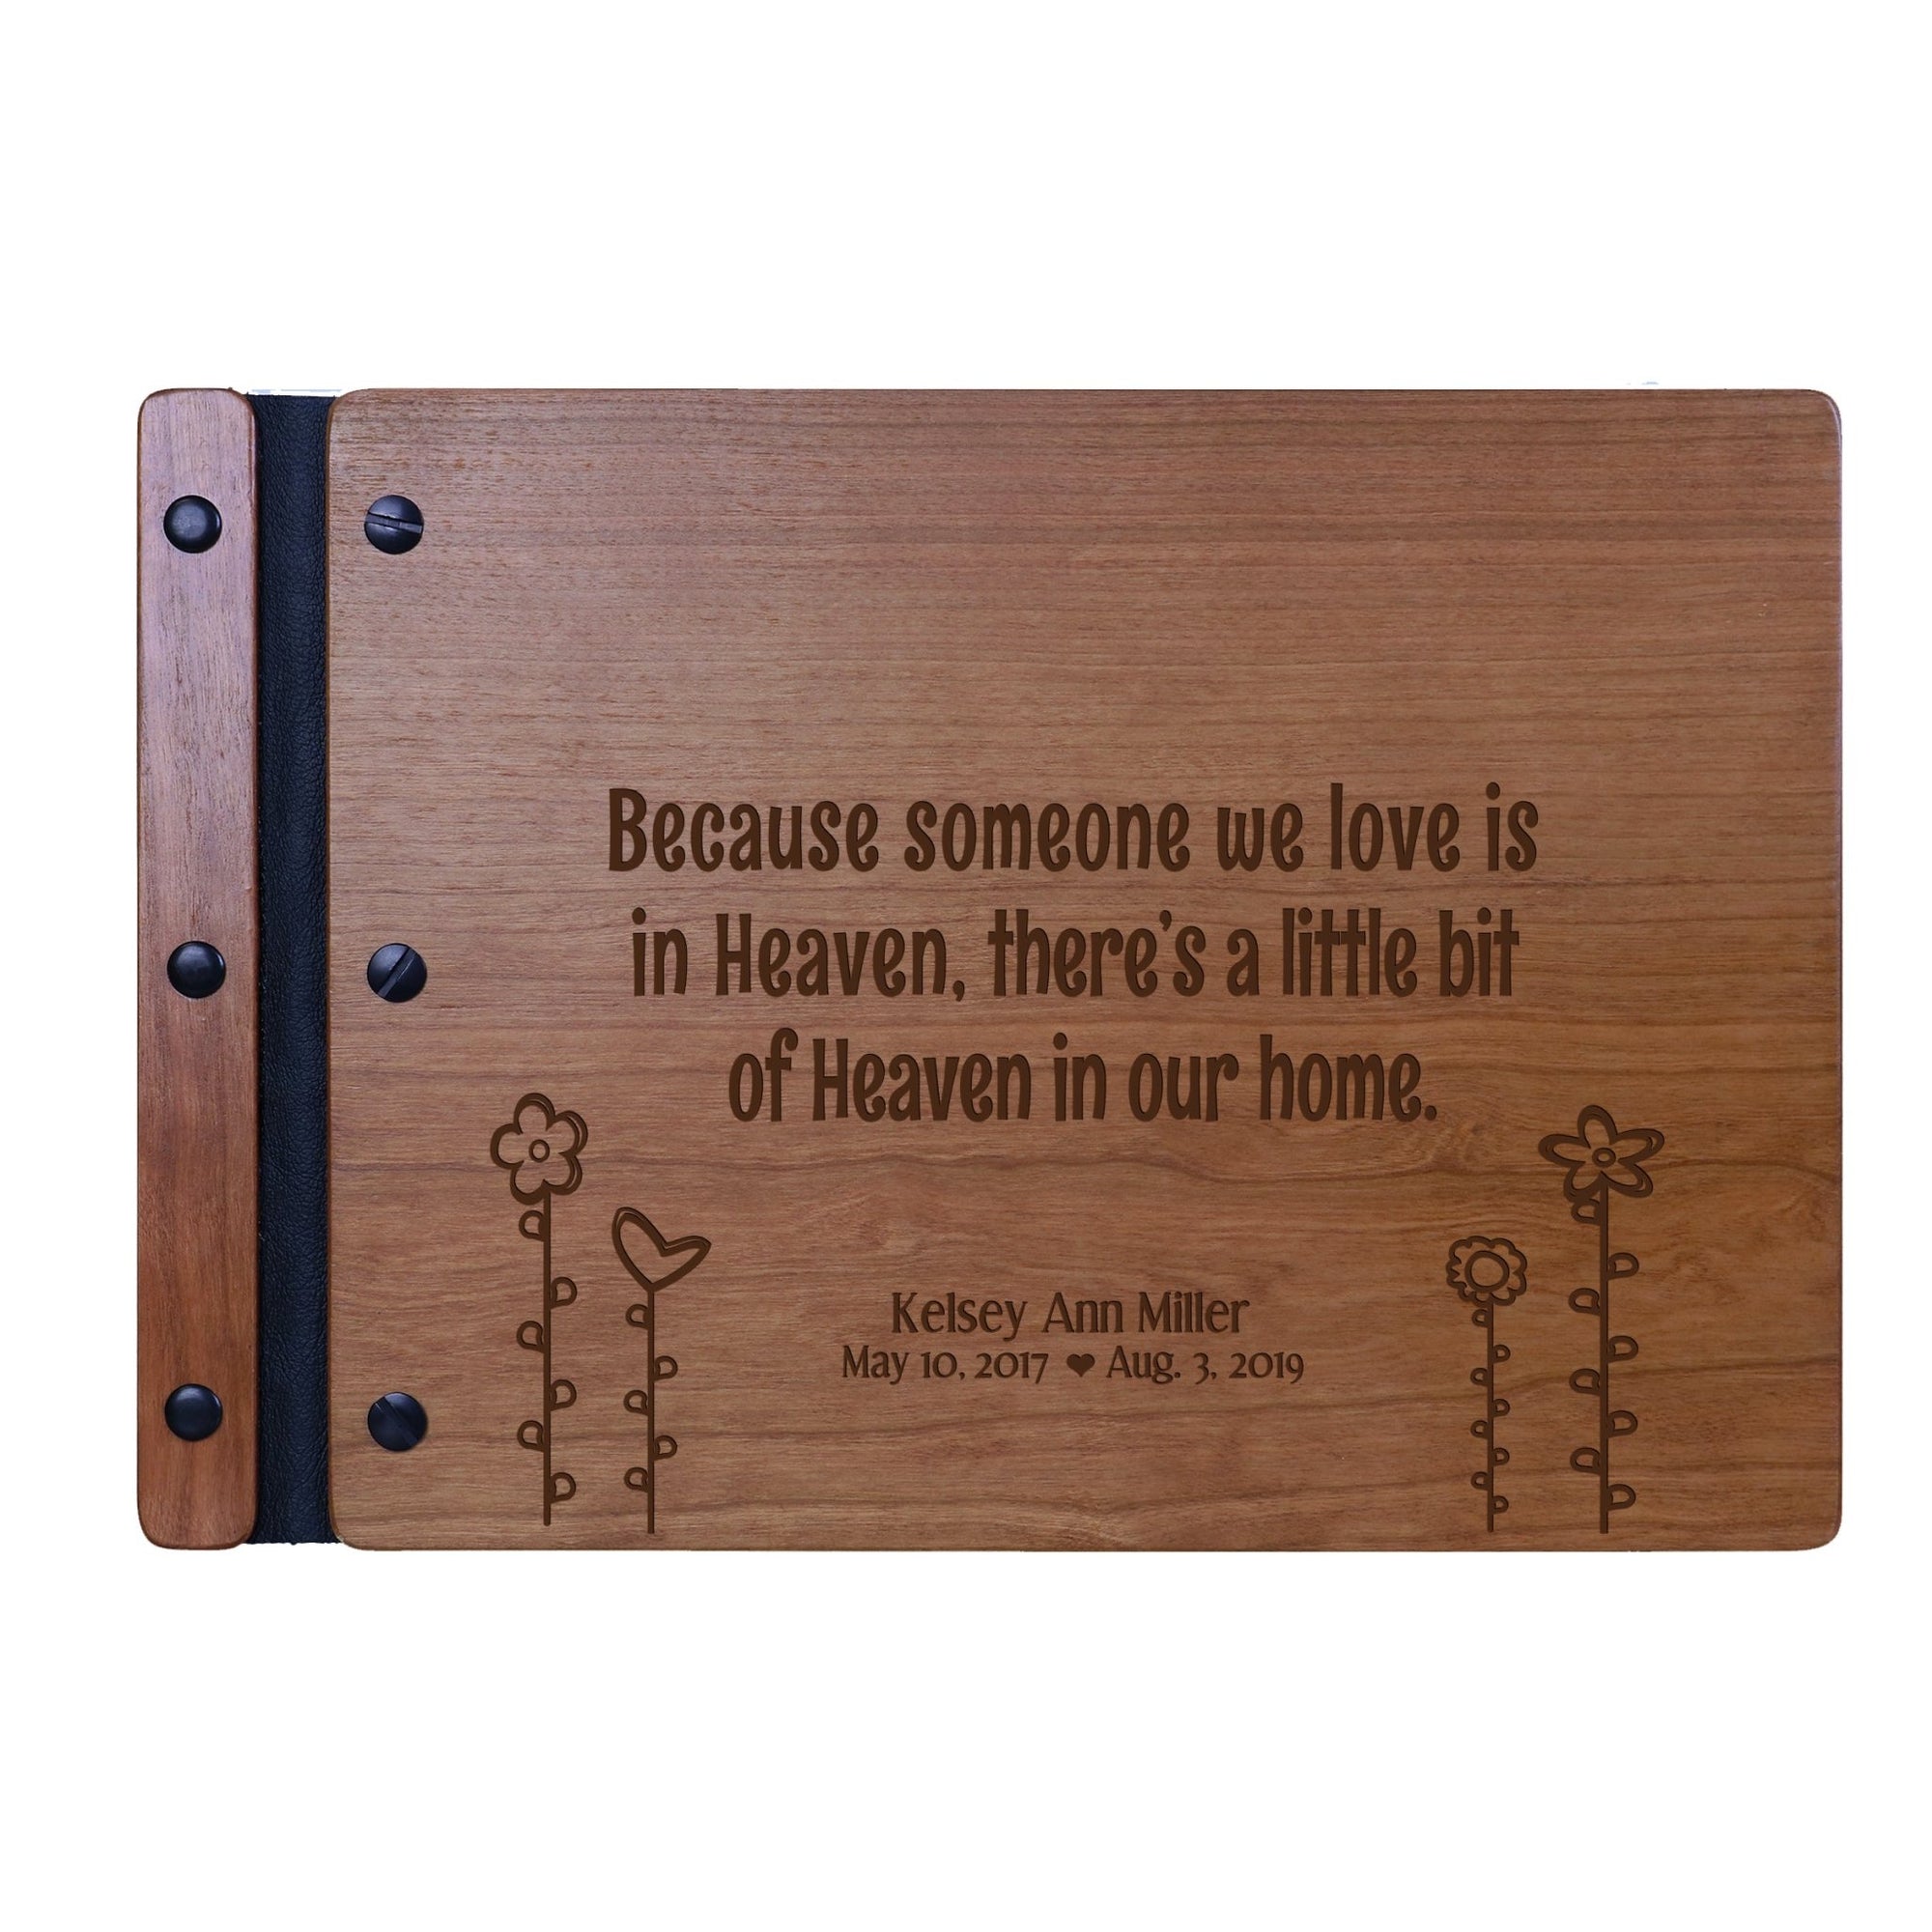 Personalized Memorial Guest Book - Someone We Love - LifeSong Milestones